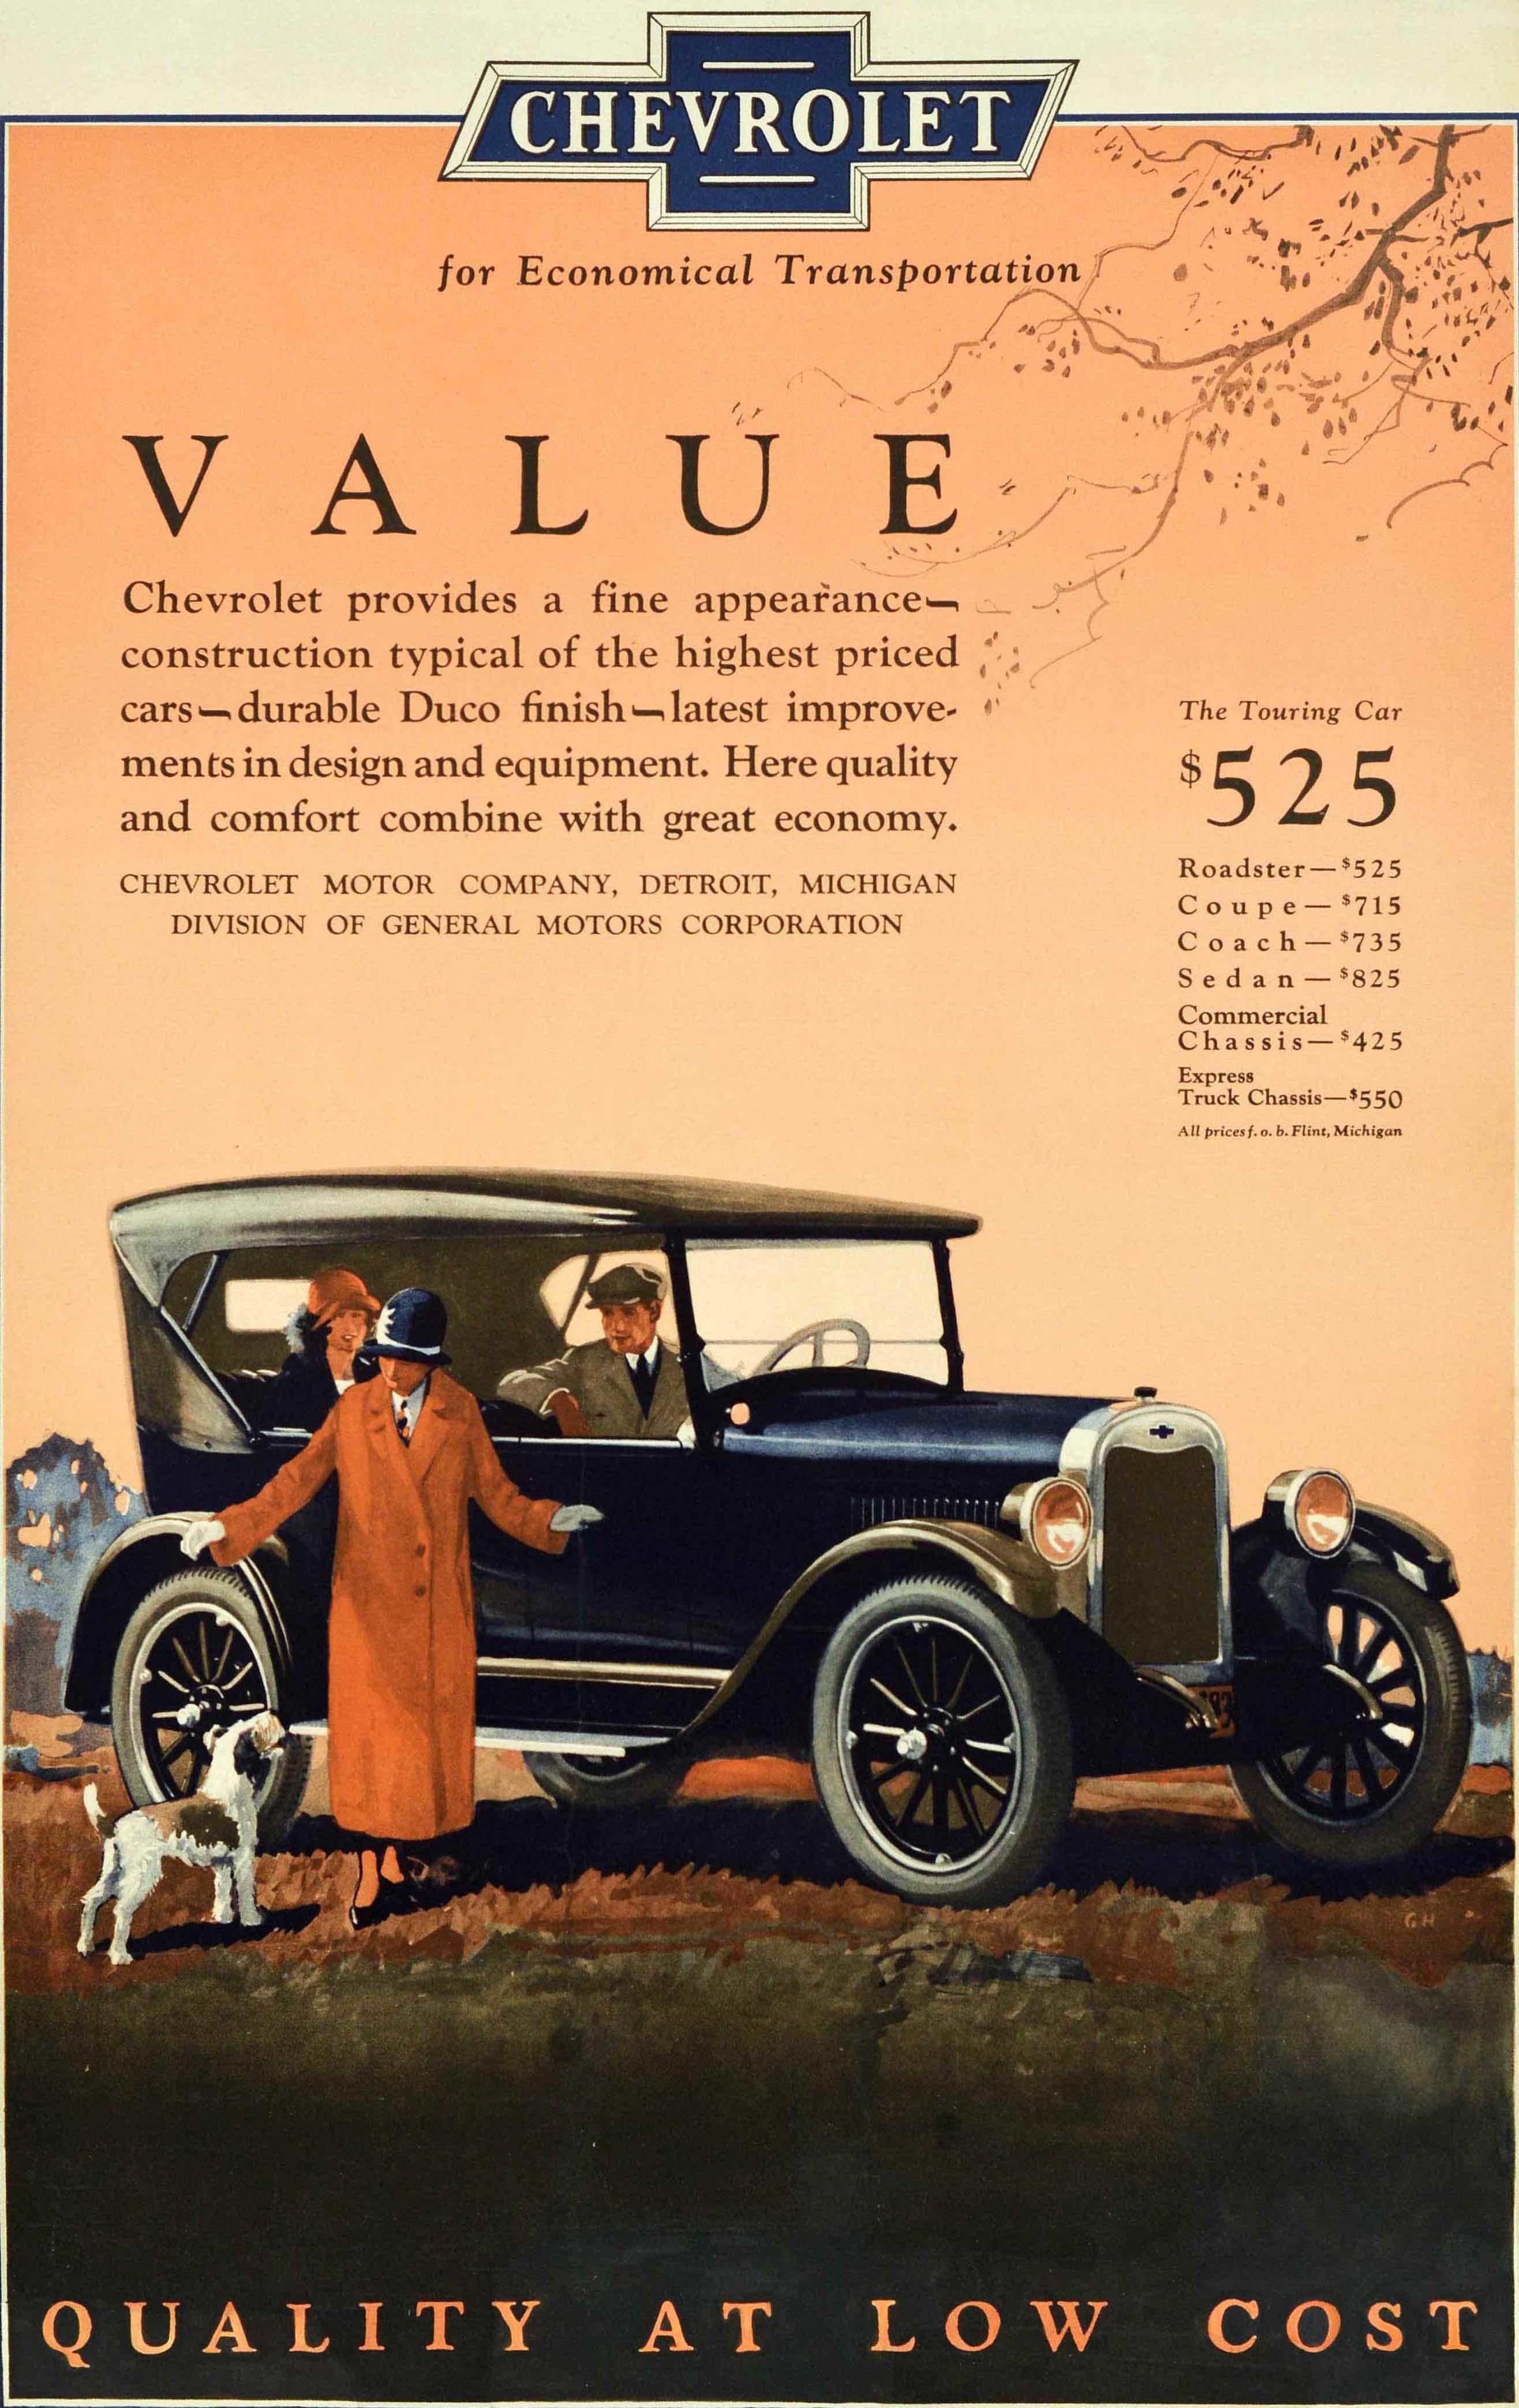 Original antique car advertising poster for Chevrolet value automobiles featuring a driver and lady inside a Chevrolet classic car with another lady and dog standing next to it in the countryside setting with the text and costs reading: Chevrolet